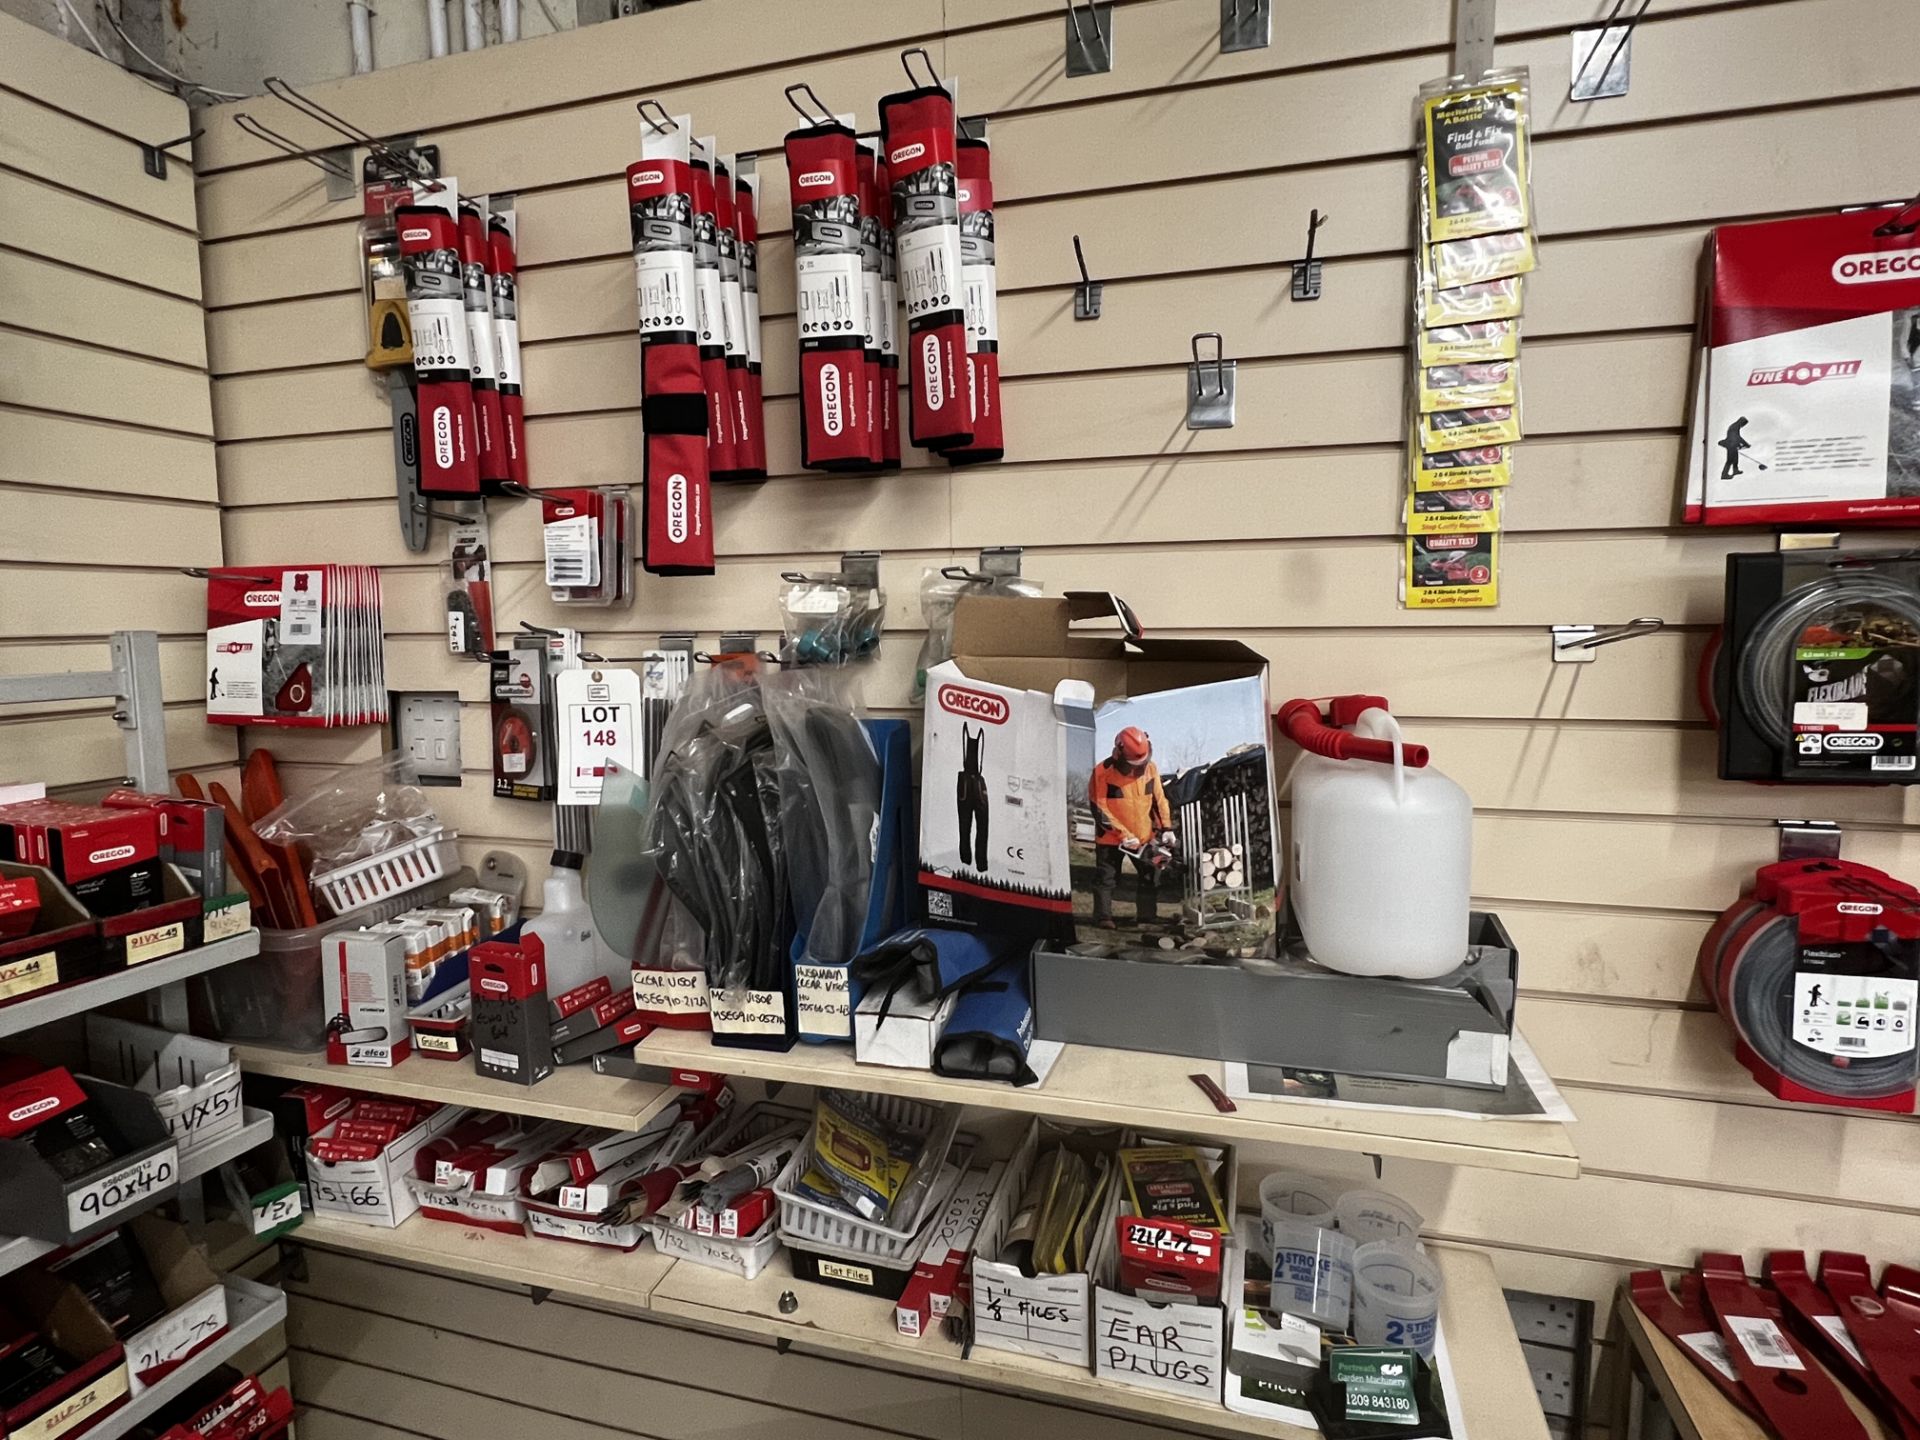 Contents to include Oregon sharpening tools, files, visors, fuel bottles (this lot is located at